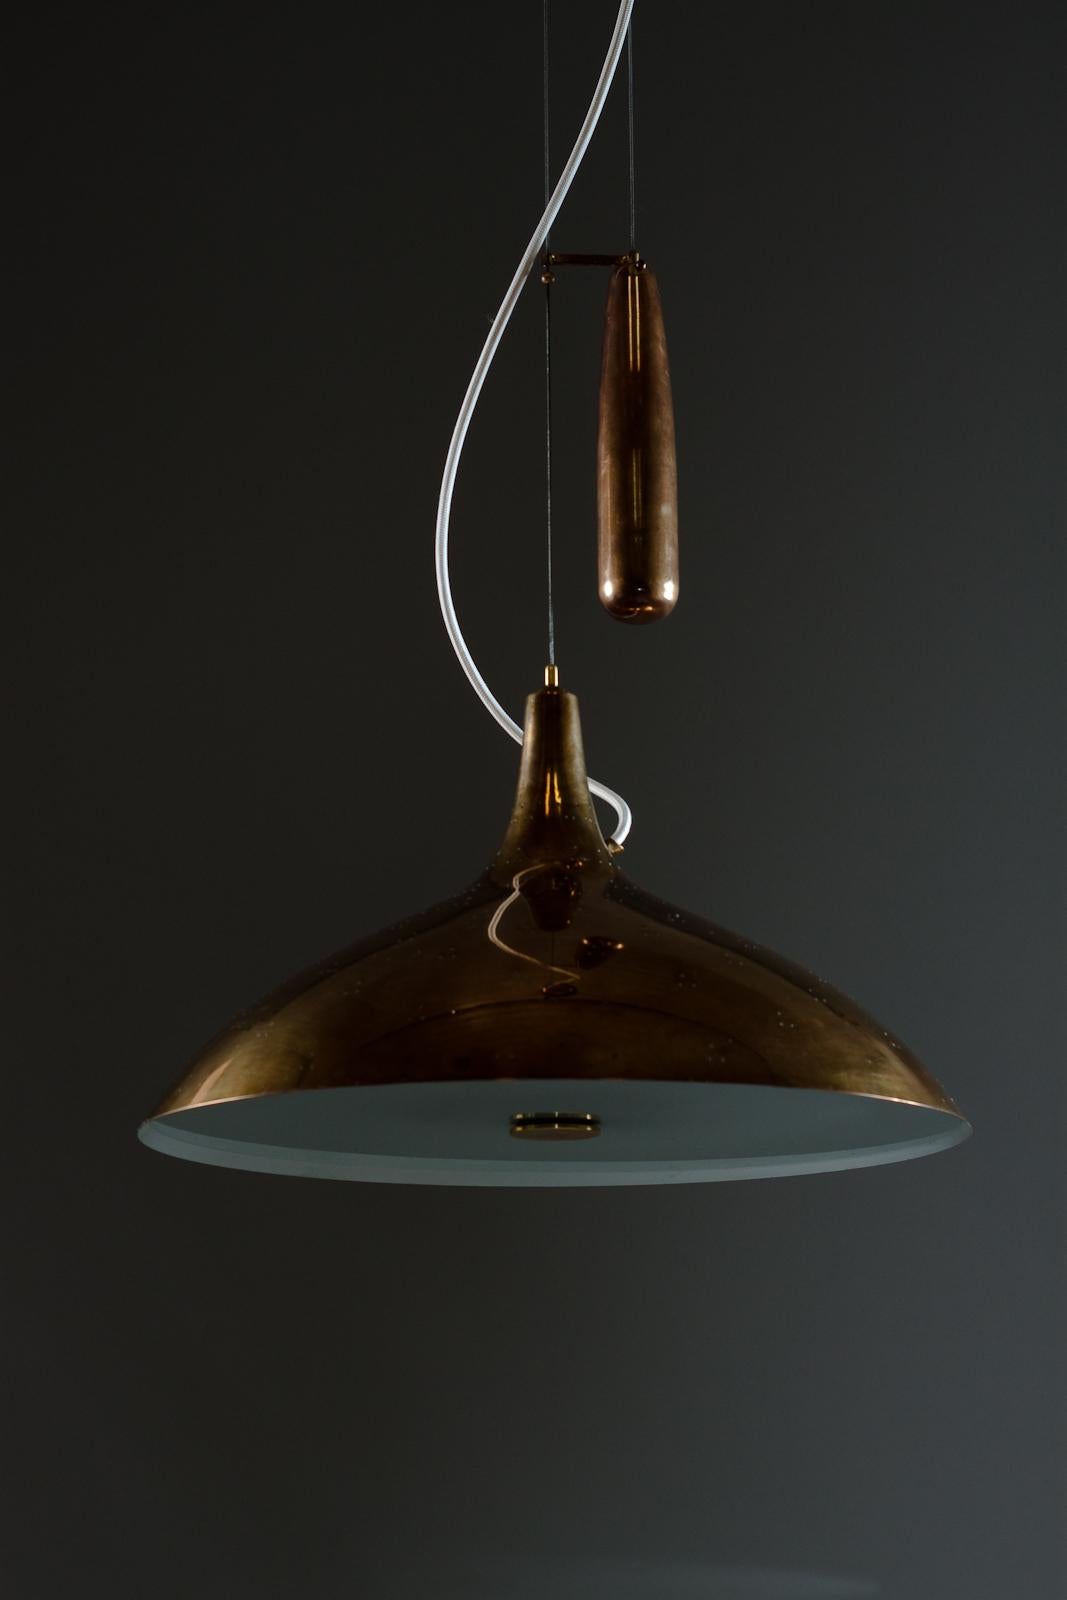 Beautiful designed pendant lamp by Paavi Tynell for Taito Oy. The patina and quality of brass is very high, not like the materials in the new production lamps.
The height can be adjusted due to the wire that is adjustable in length. This counter